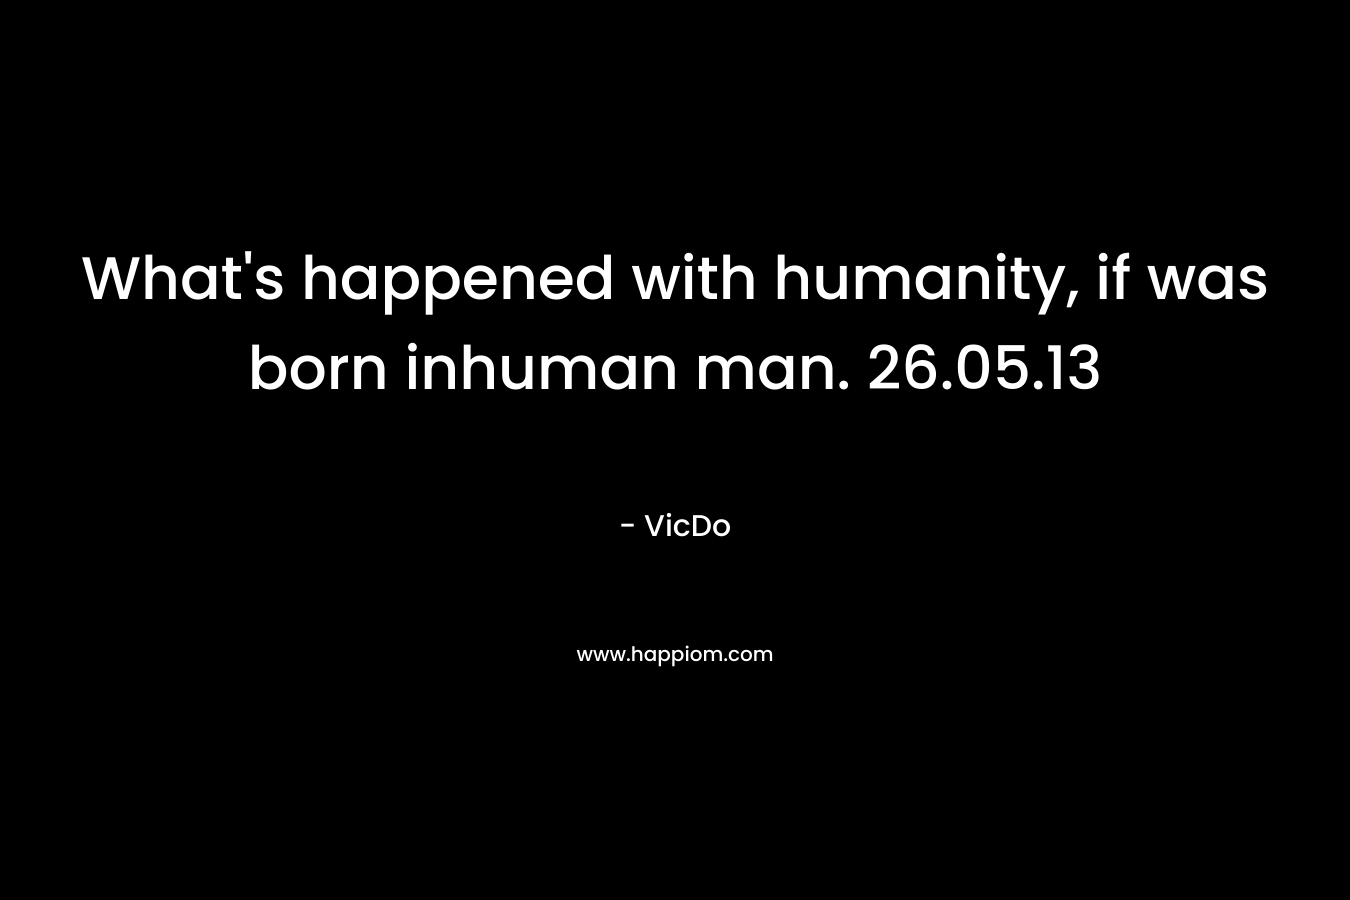 What's happened with humanity, if was born inhuman man. 26.05.13